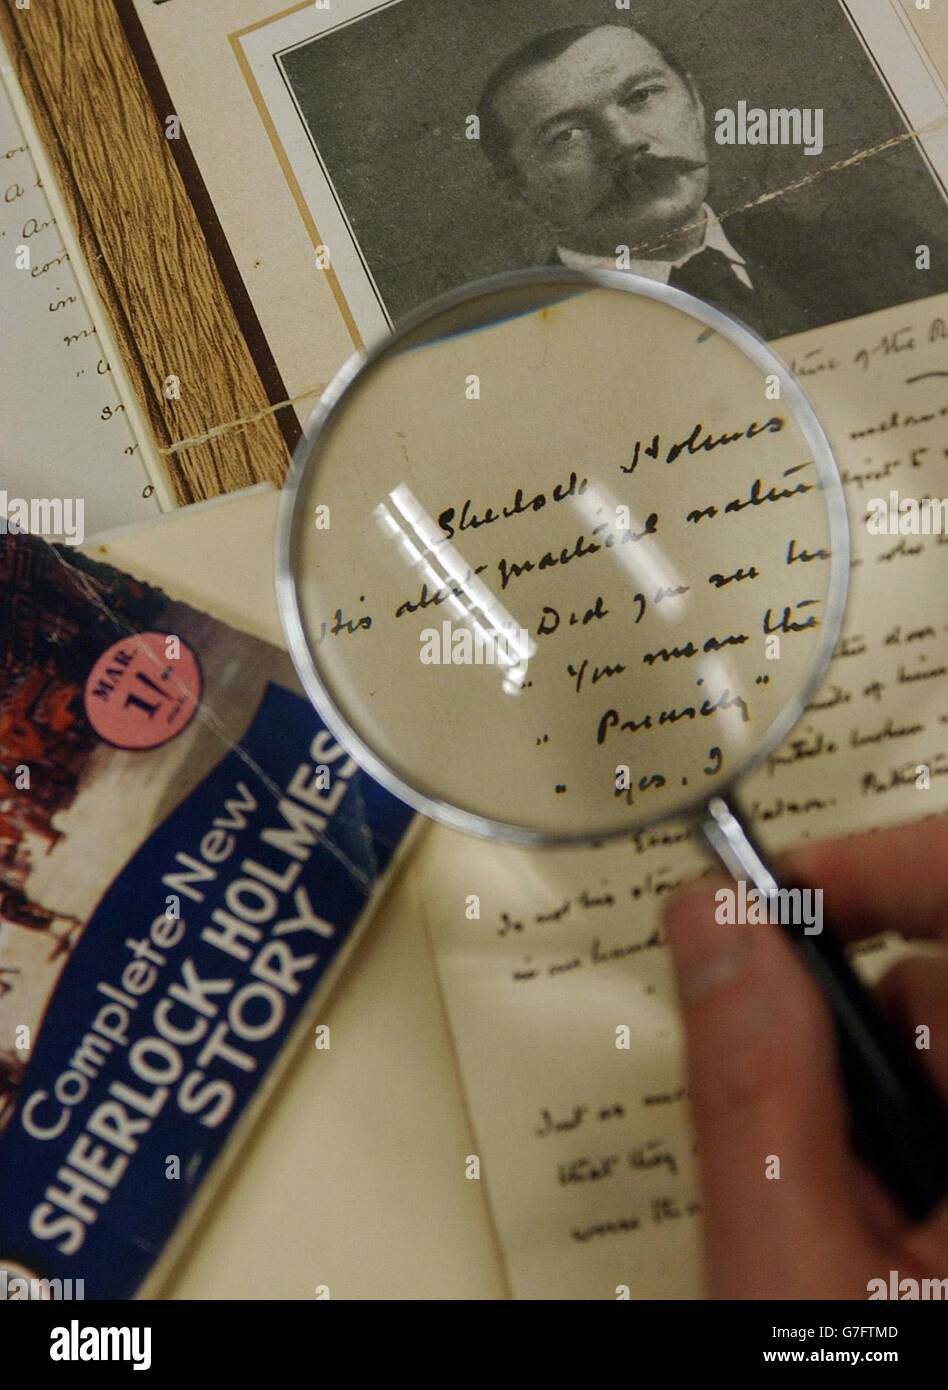 Some maunscripts, letters and photographs of Sir Arthur Conan Doyle and other previously unseen material, which will go on display at the British Library in London starting tomorrow. Stock Photo